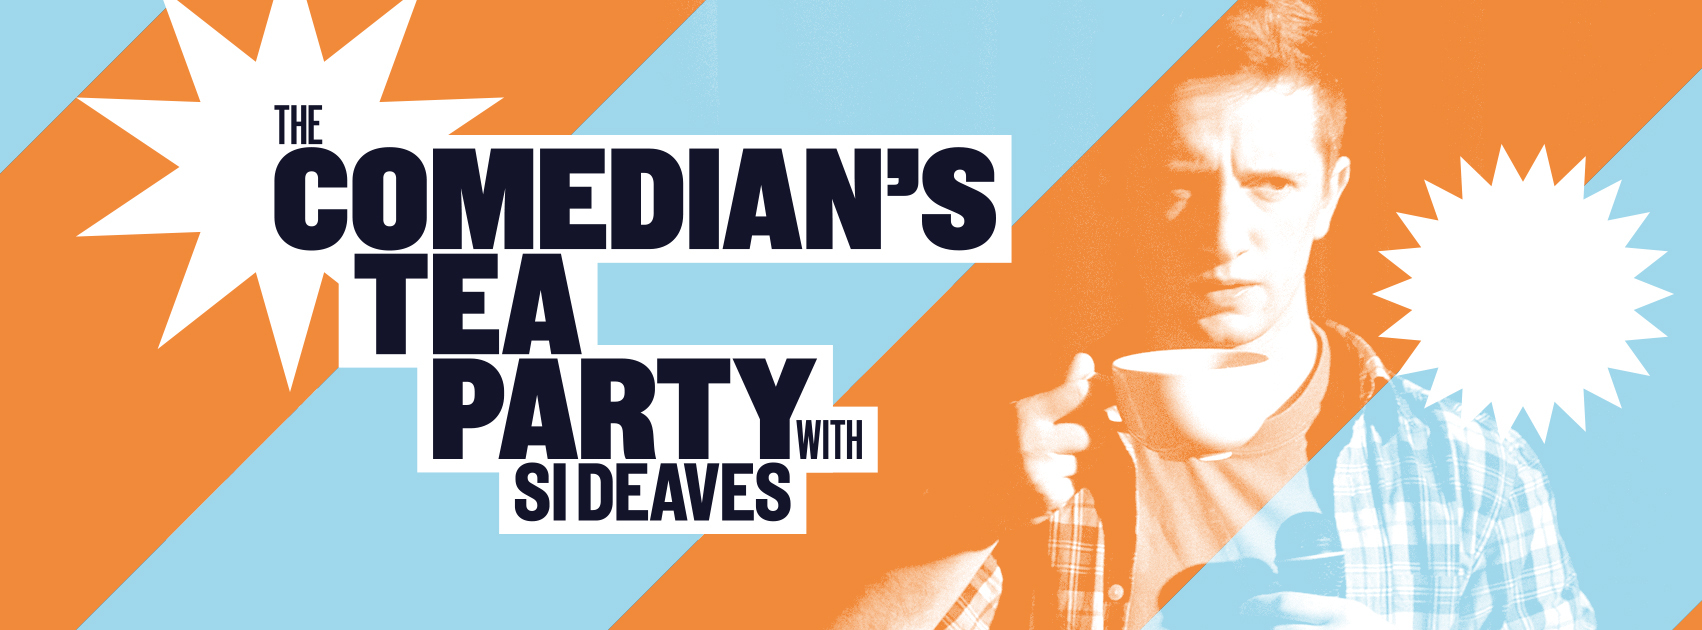 The Comedian's Tea Party with Si Deaves